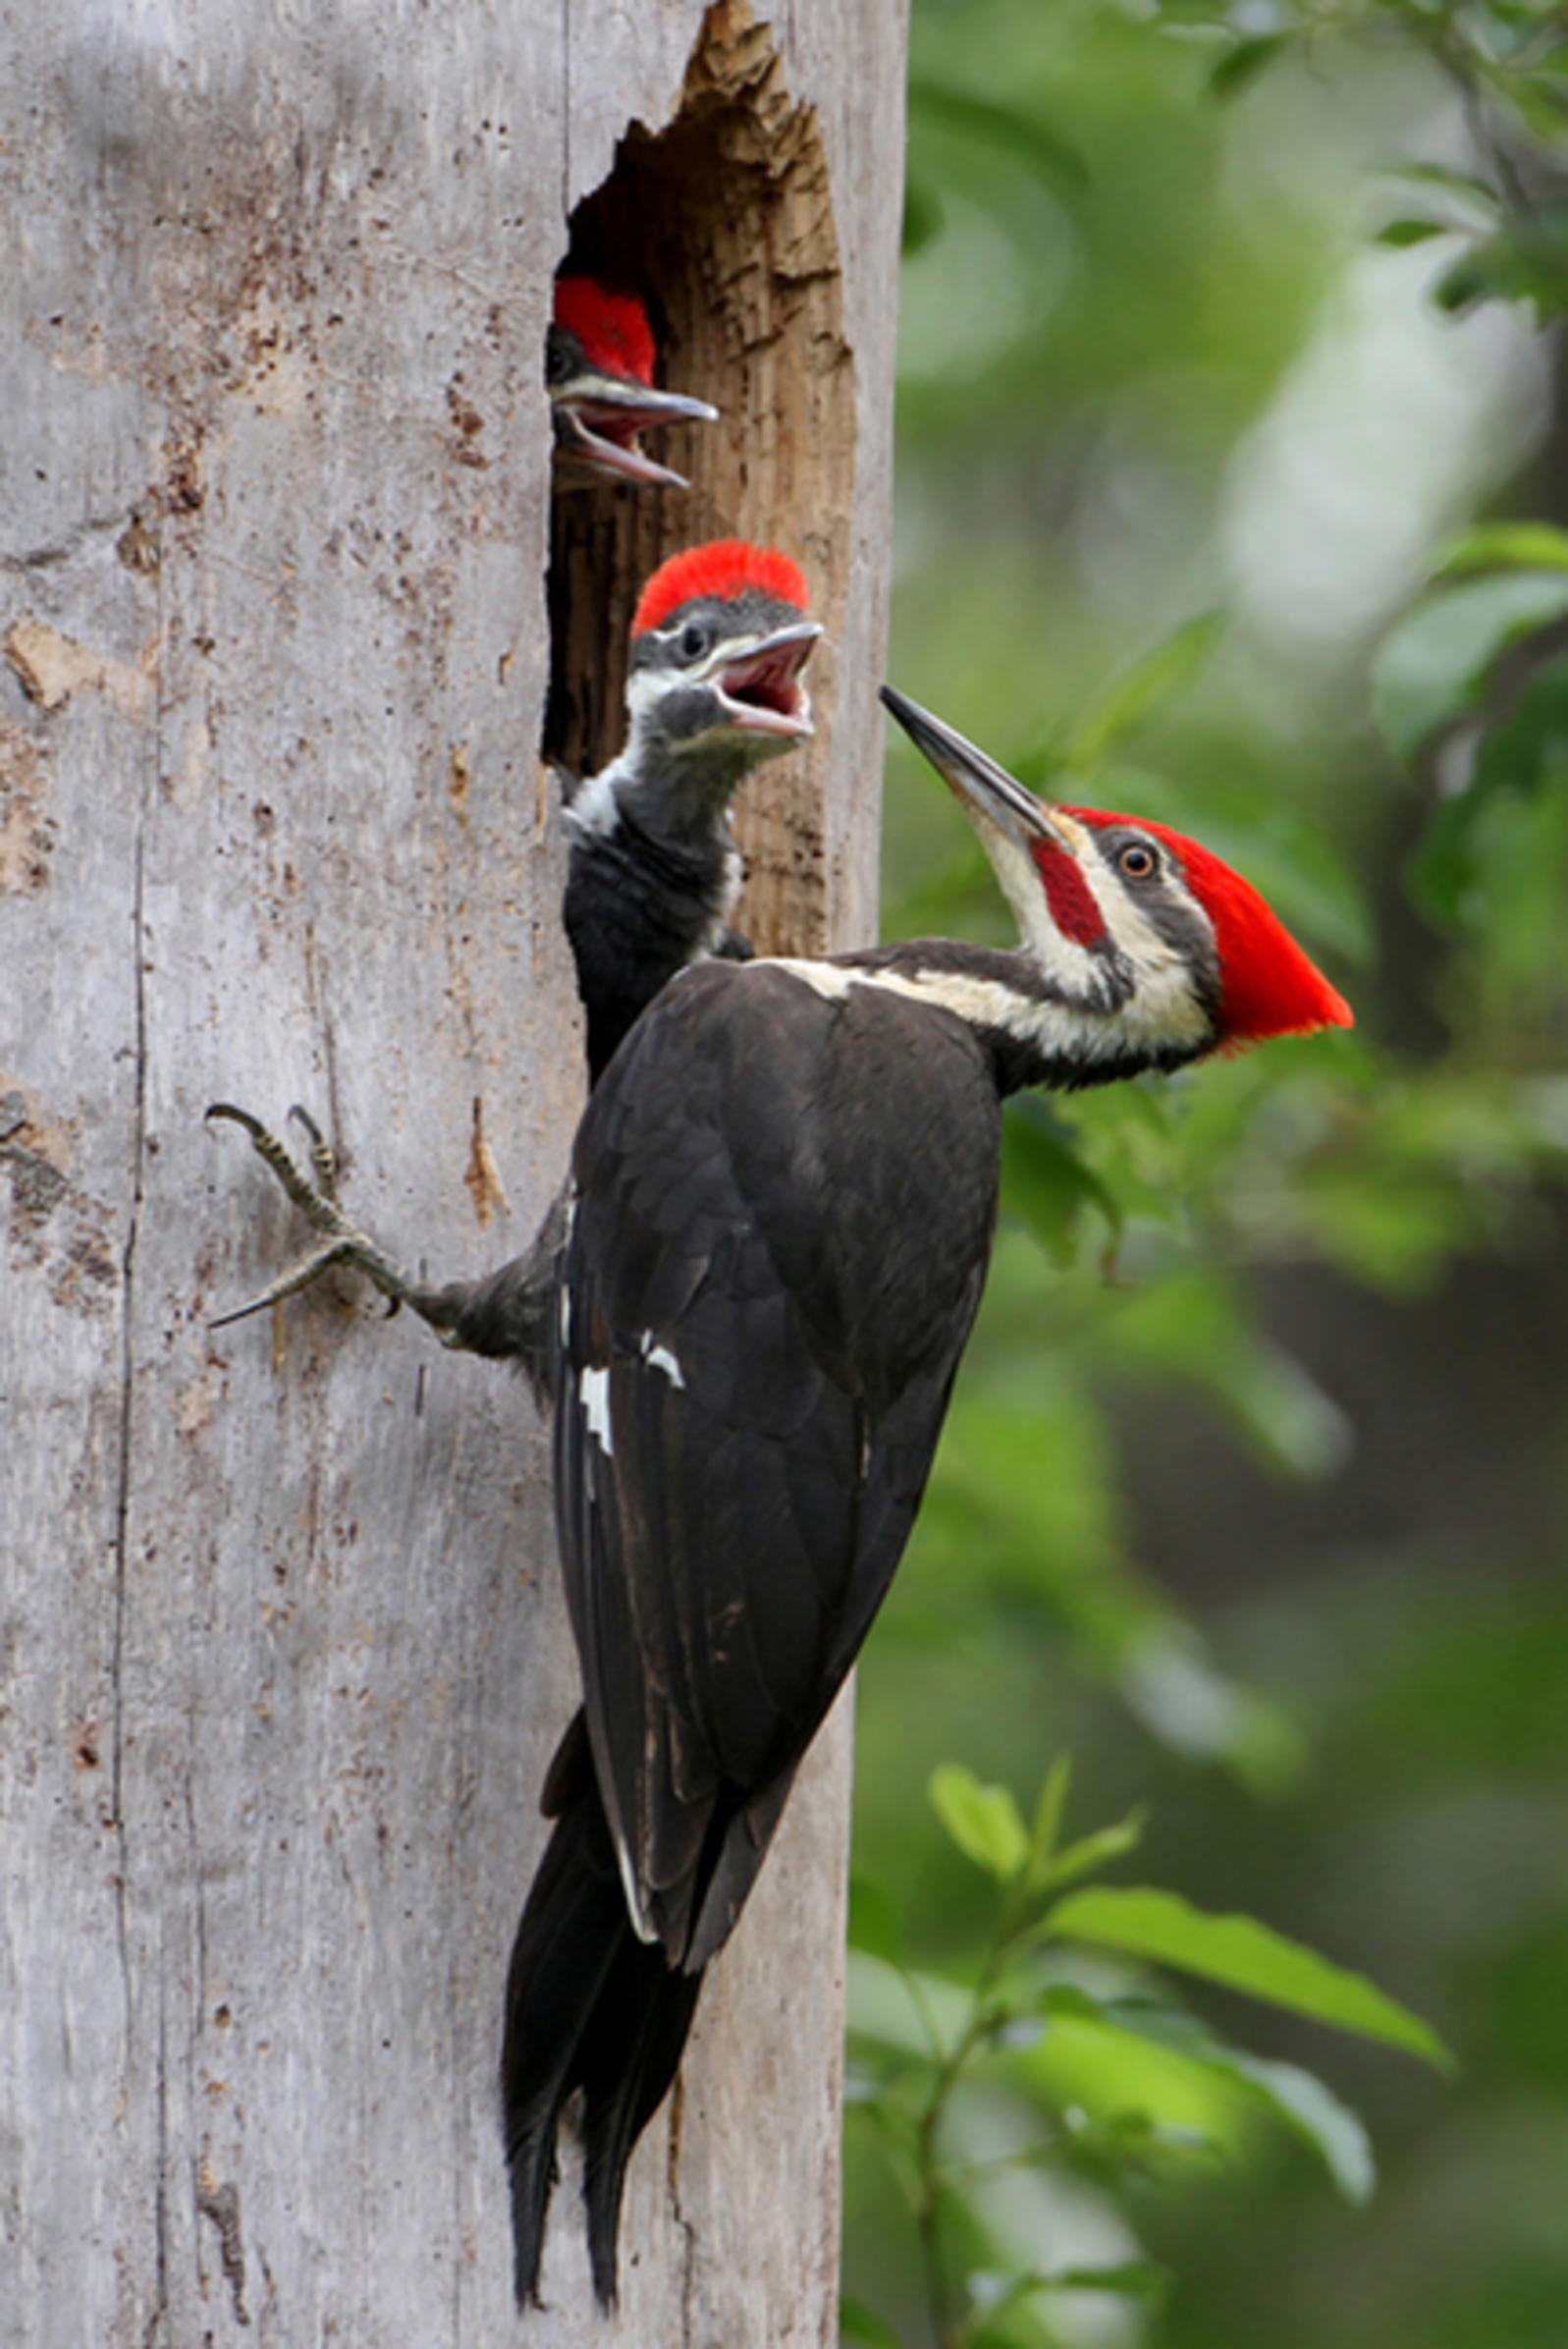 A picture of the pileated woodpecker with its young | Stanley Chamber